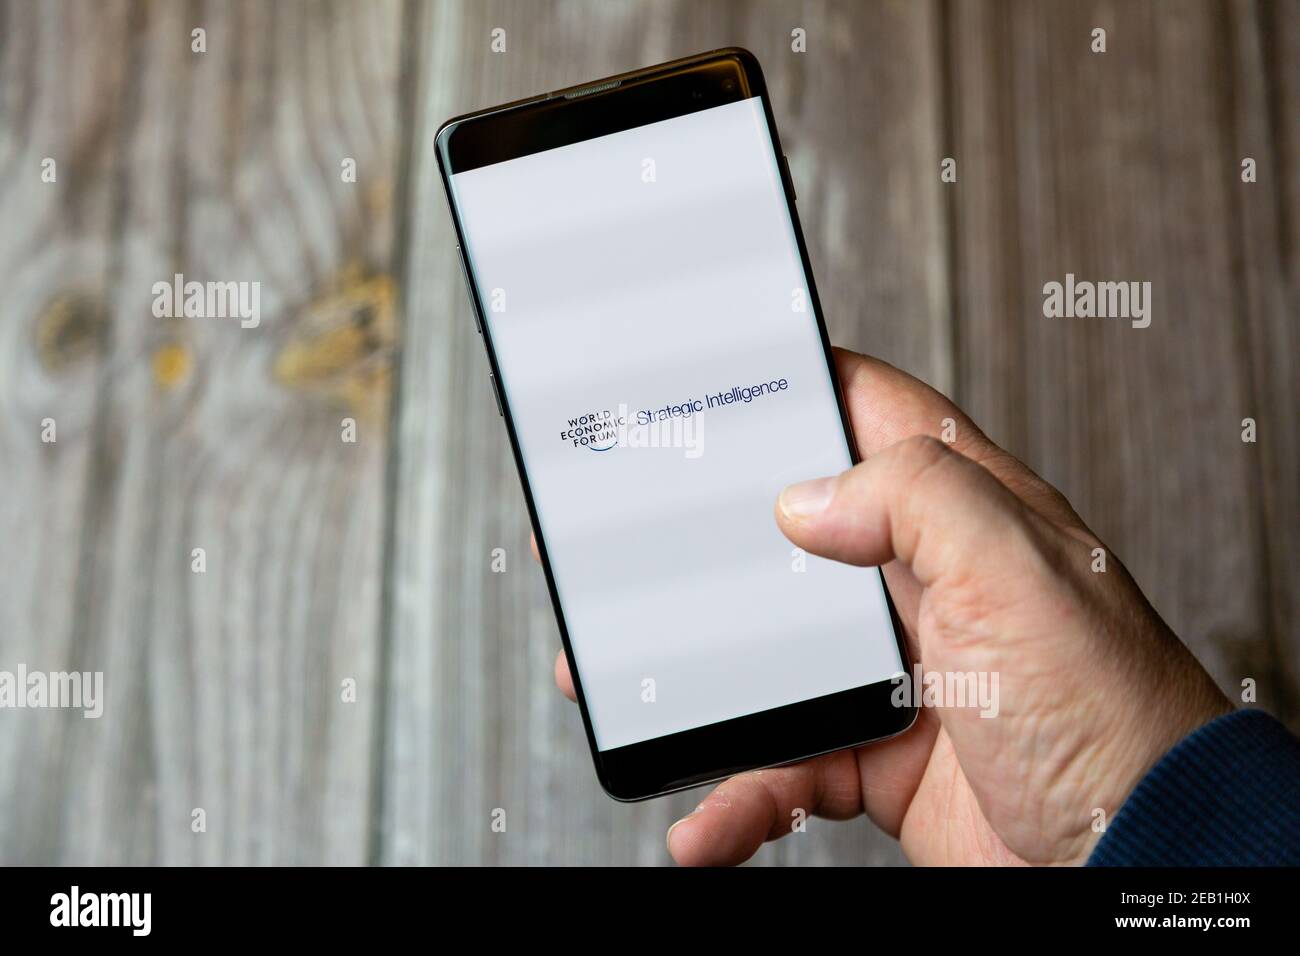 A mobile phone or cell phone being held by a hand with the World economic forum app open on screen Stock Photo